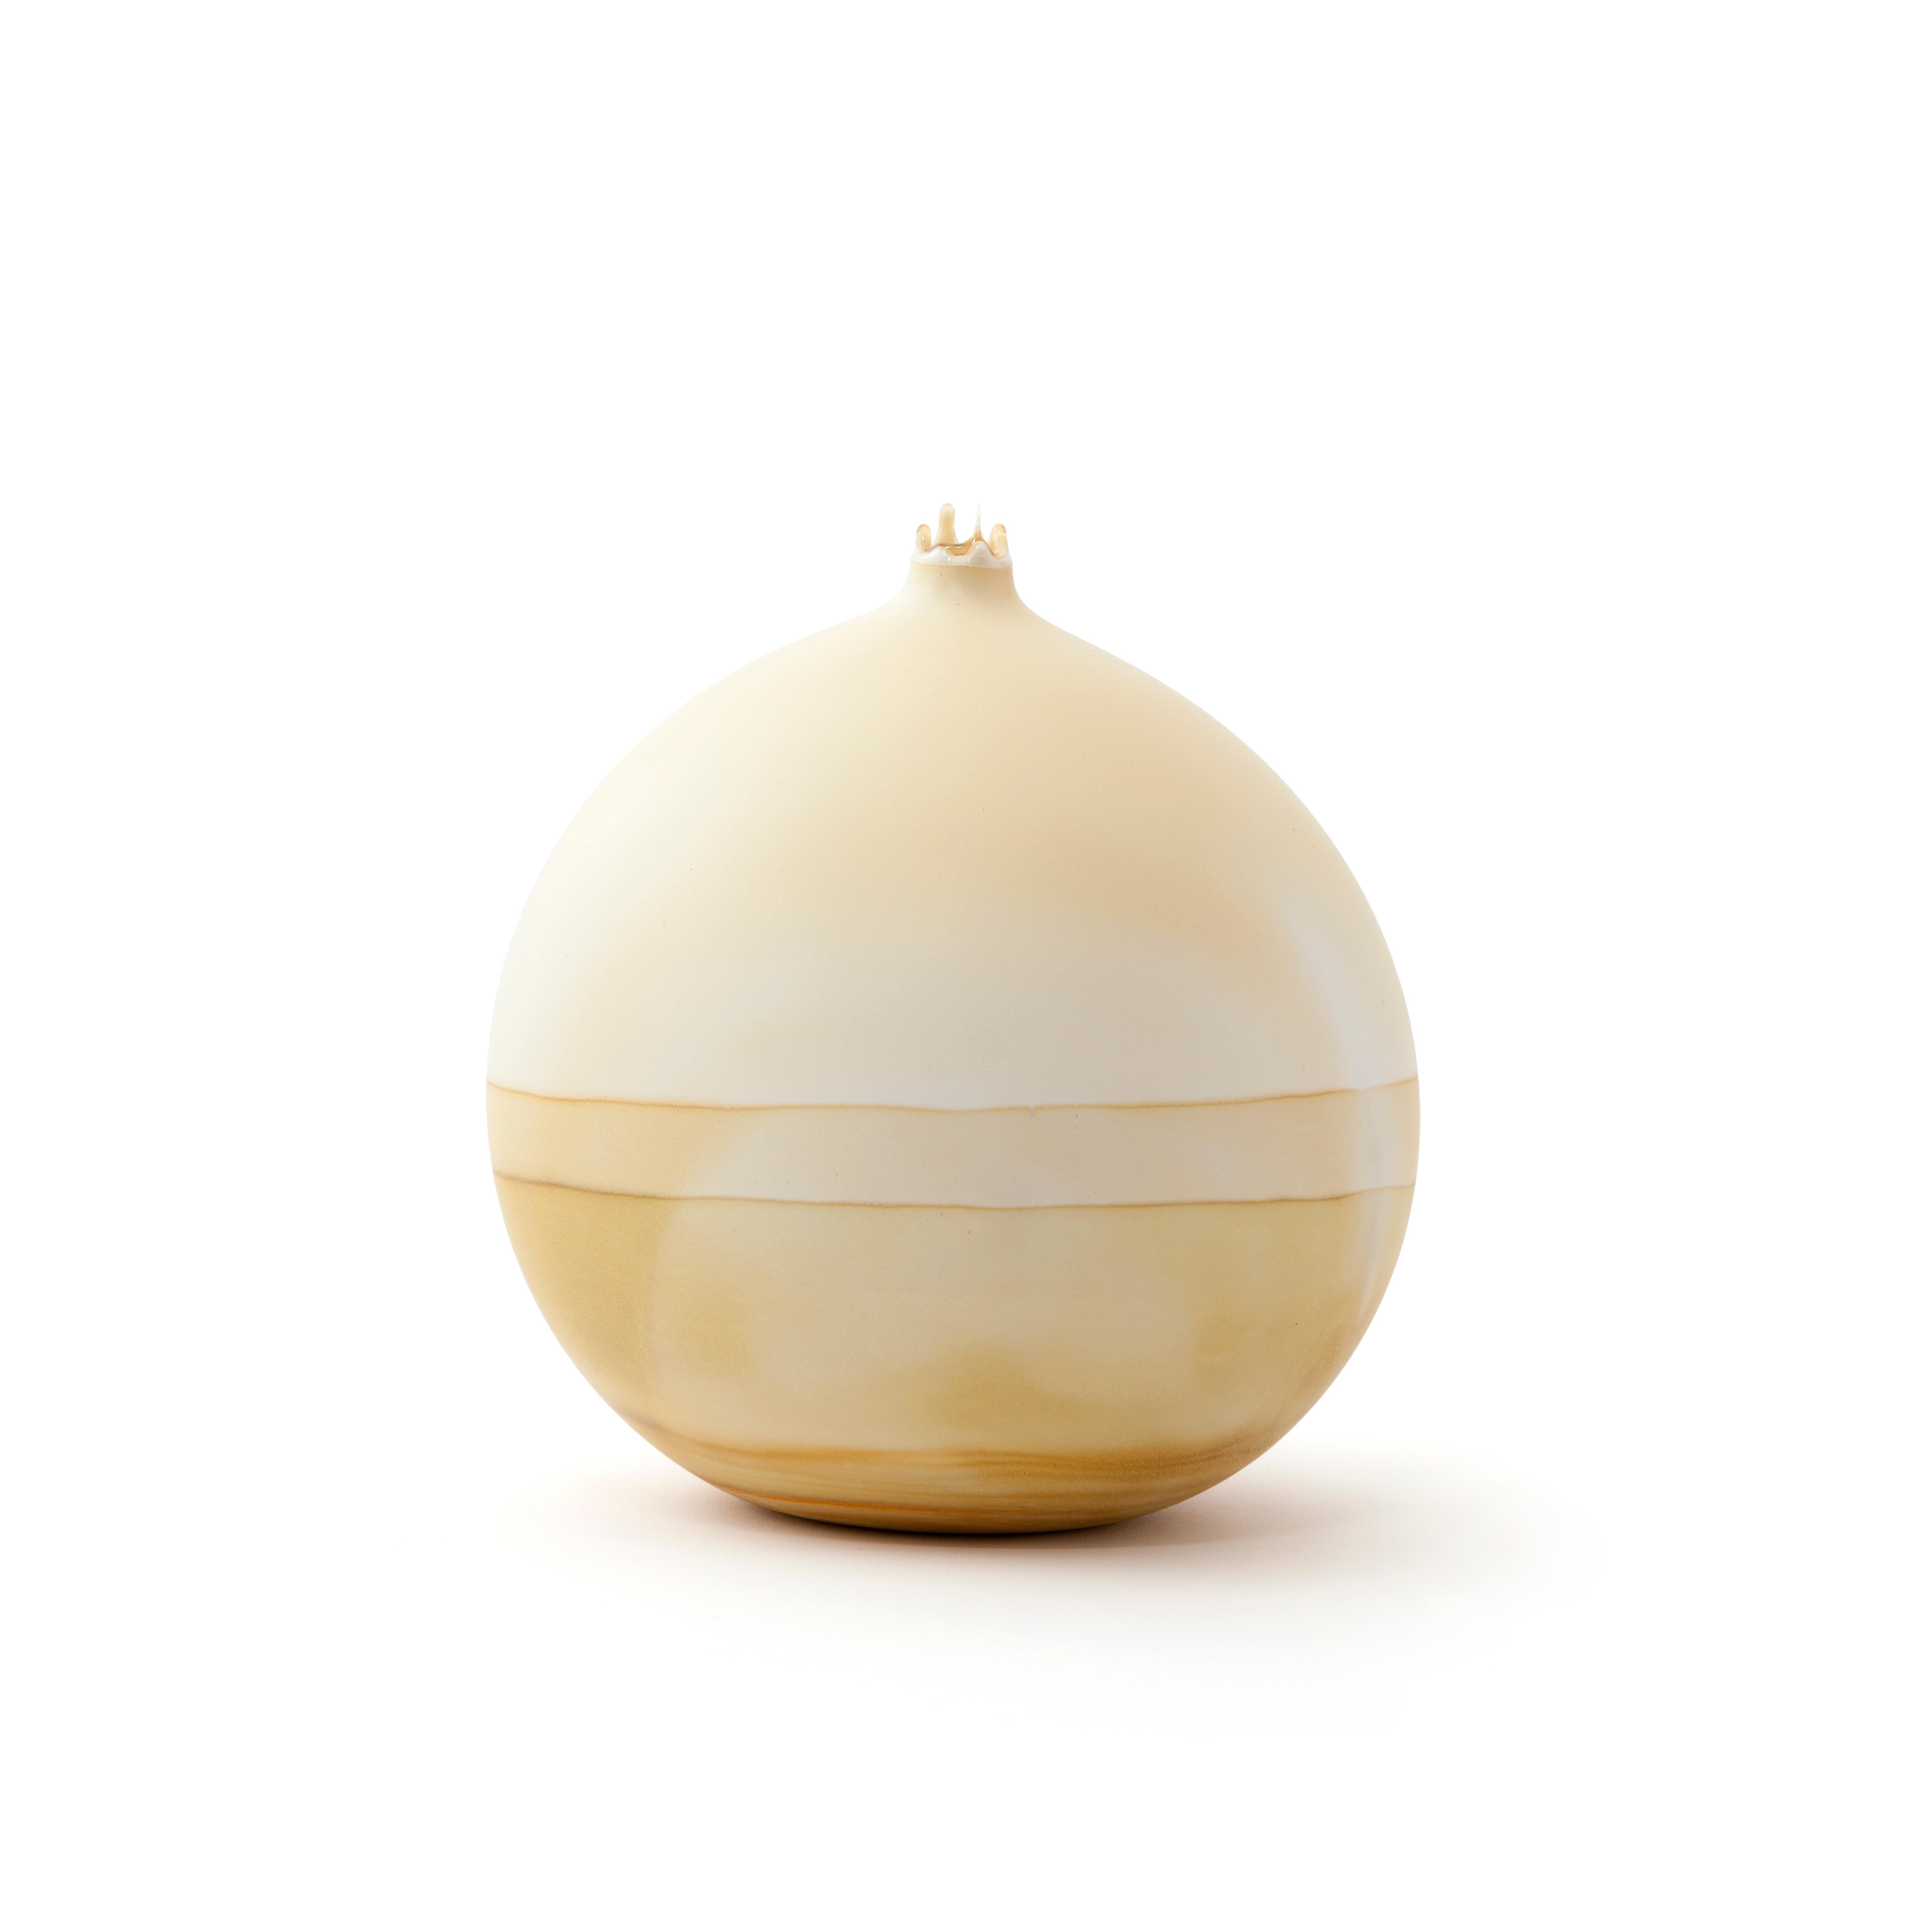 Bone Ombre saturn vase by Elyse Graham
Dimensions: W 20 x D 20 x H 23 cm
Materials: Plaster, Resin
MOLDED, DYED, AND FINISHED BY HAND IN LA. CUSTOMIZATION
AVAILABLE.
ALL PIECES ARE MADE TO ORDER

This collection of vessels is inspired by